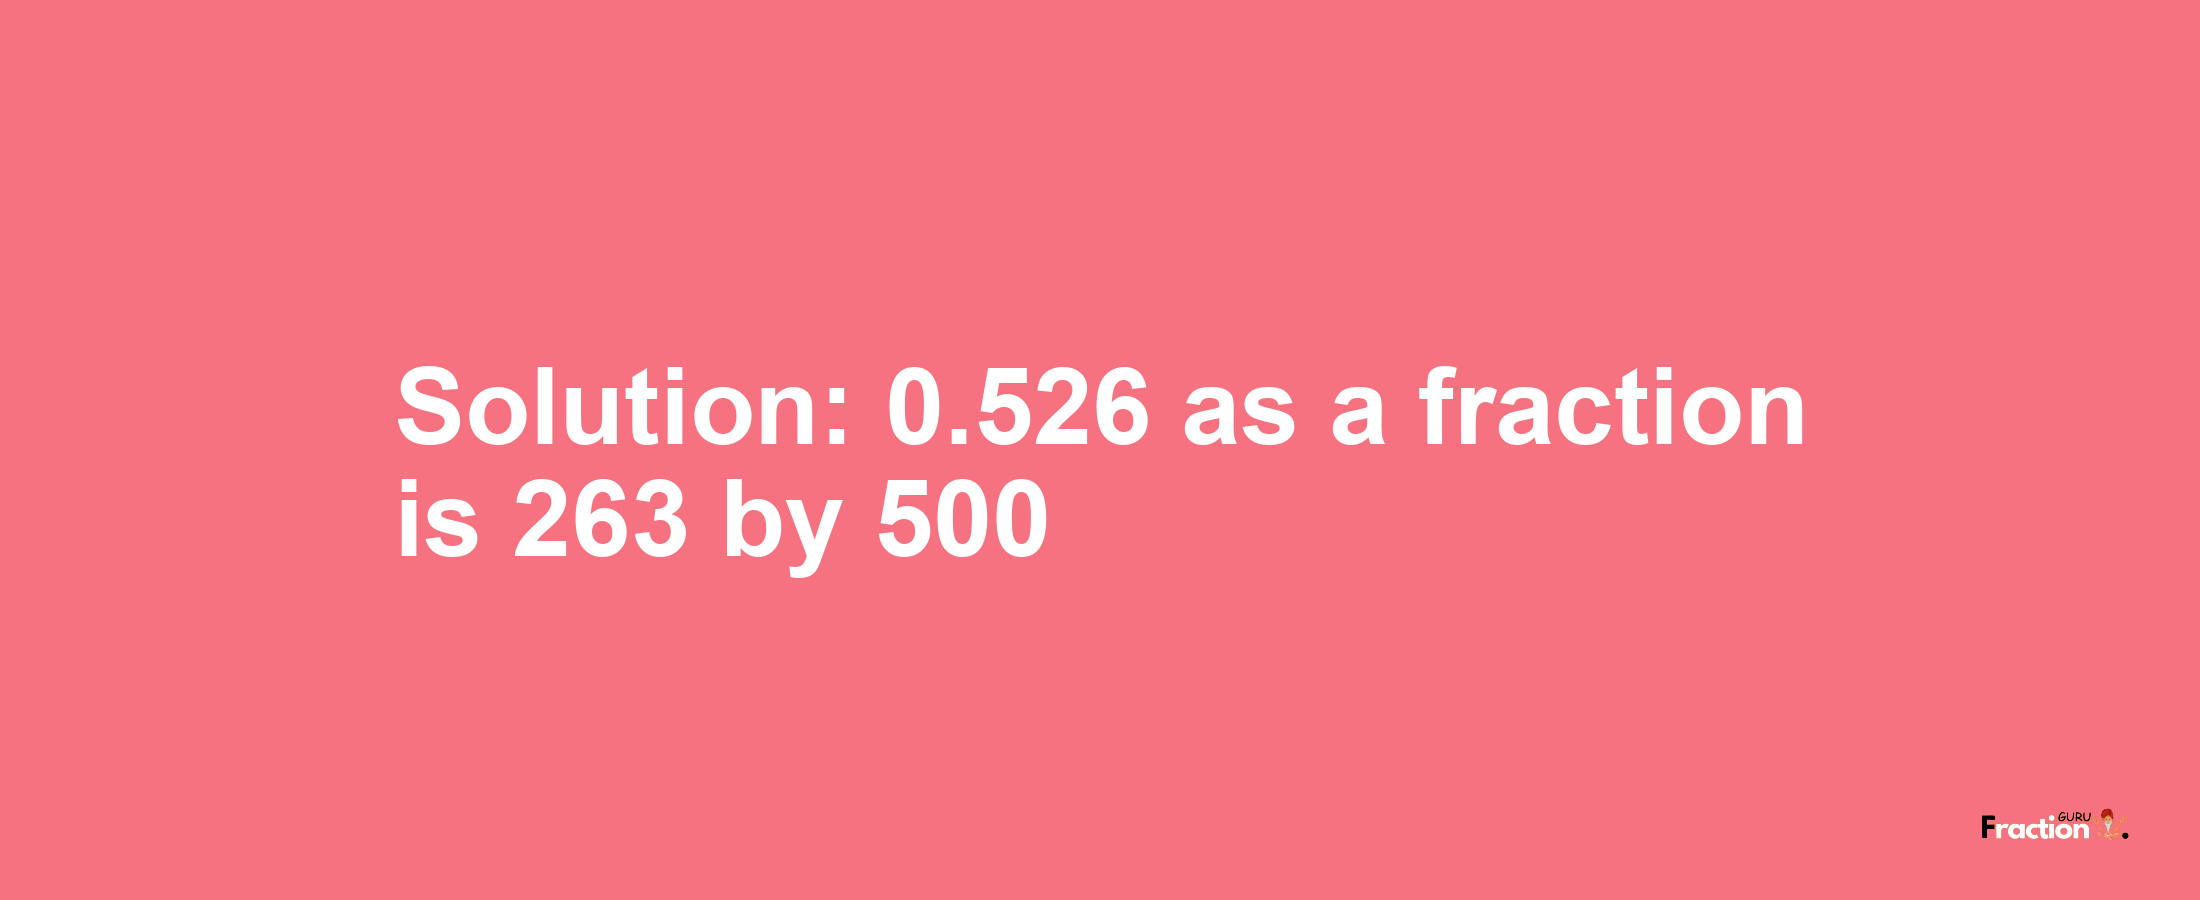 Solution:0.526 as a fraction is 263/500